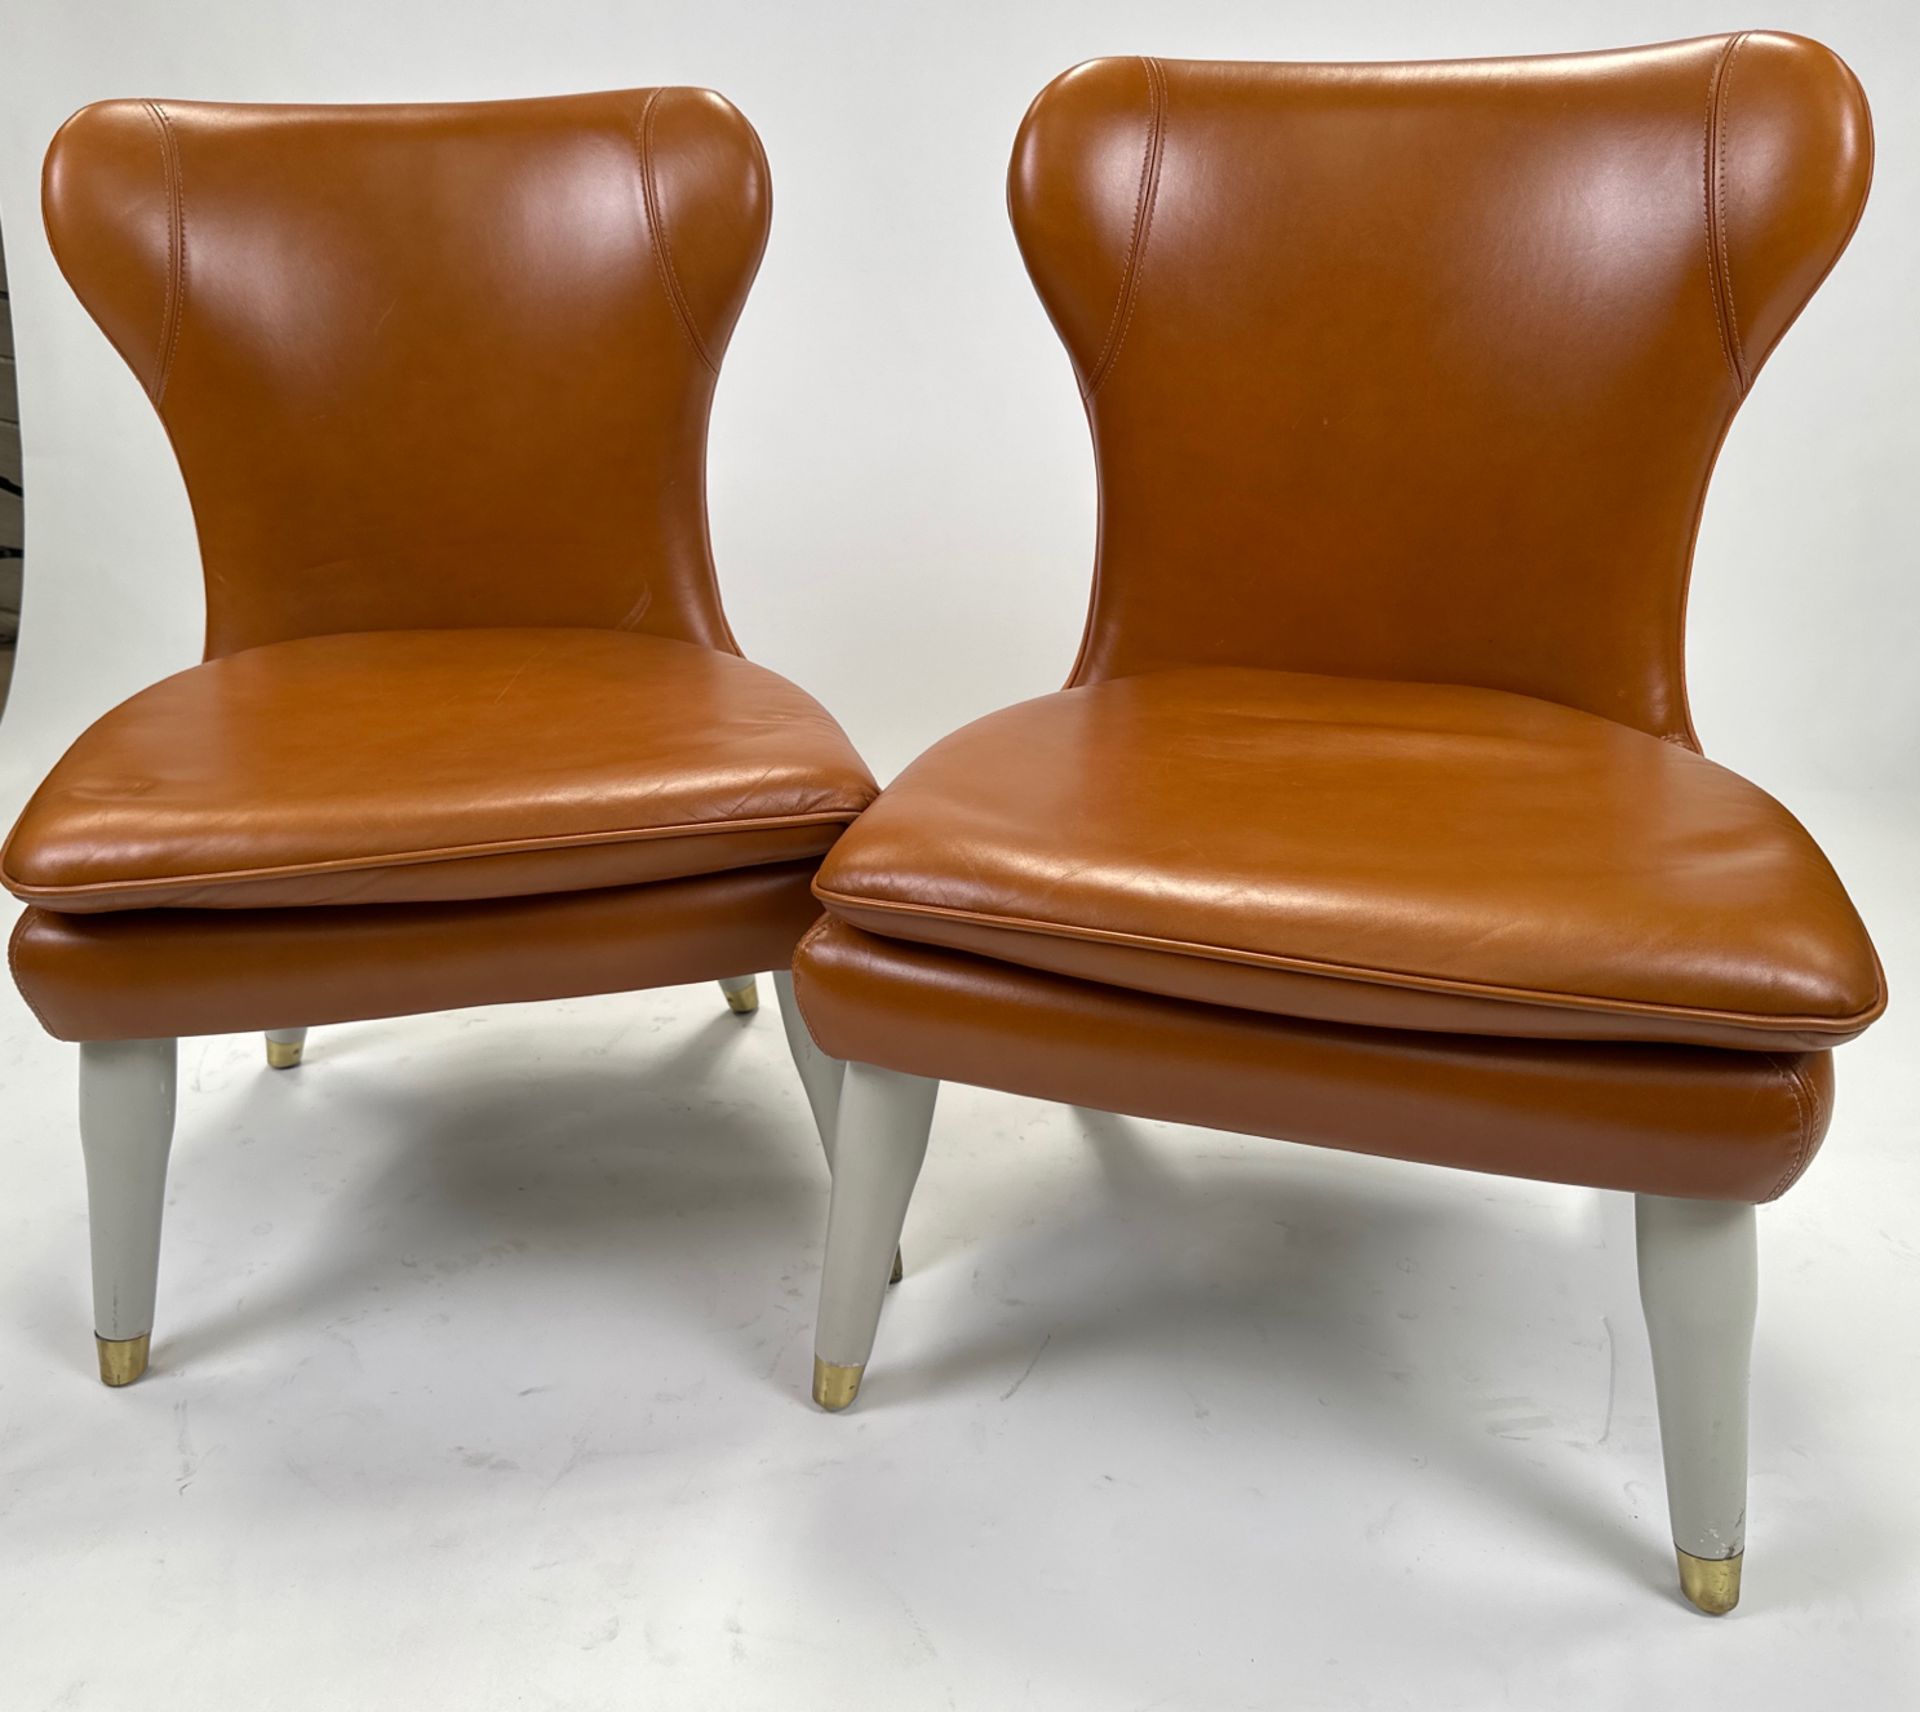 Pair of Ben Whistler Chairs Commissioned by Robert Angell Designed for The Berkeley - Image 2 of 5